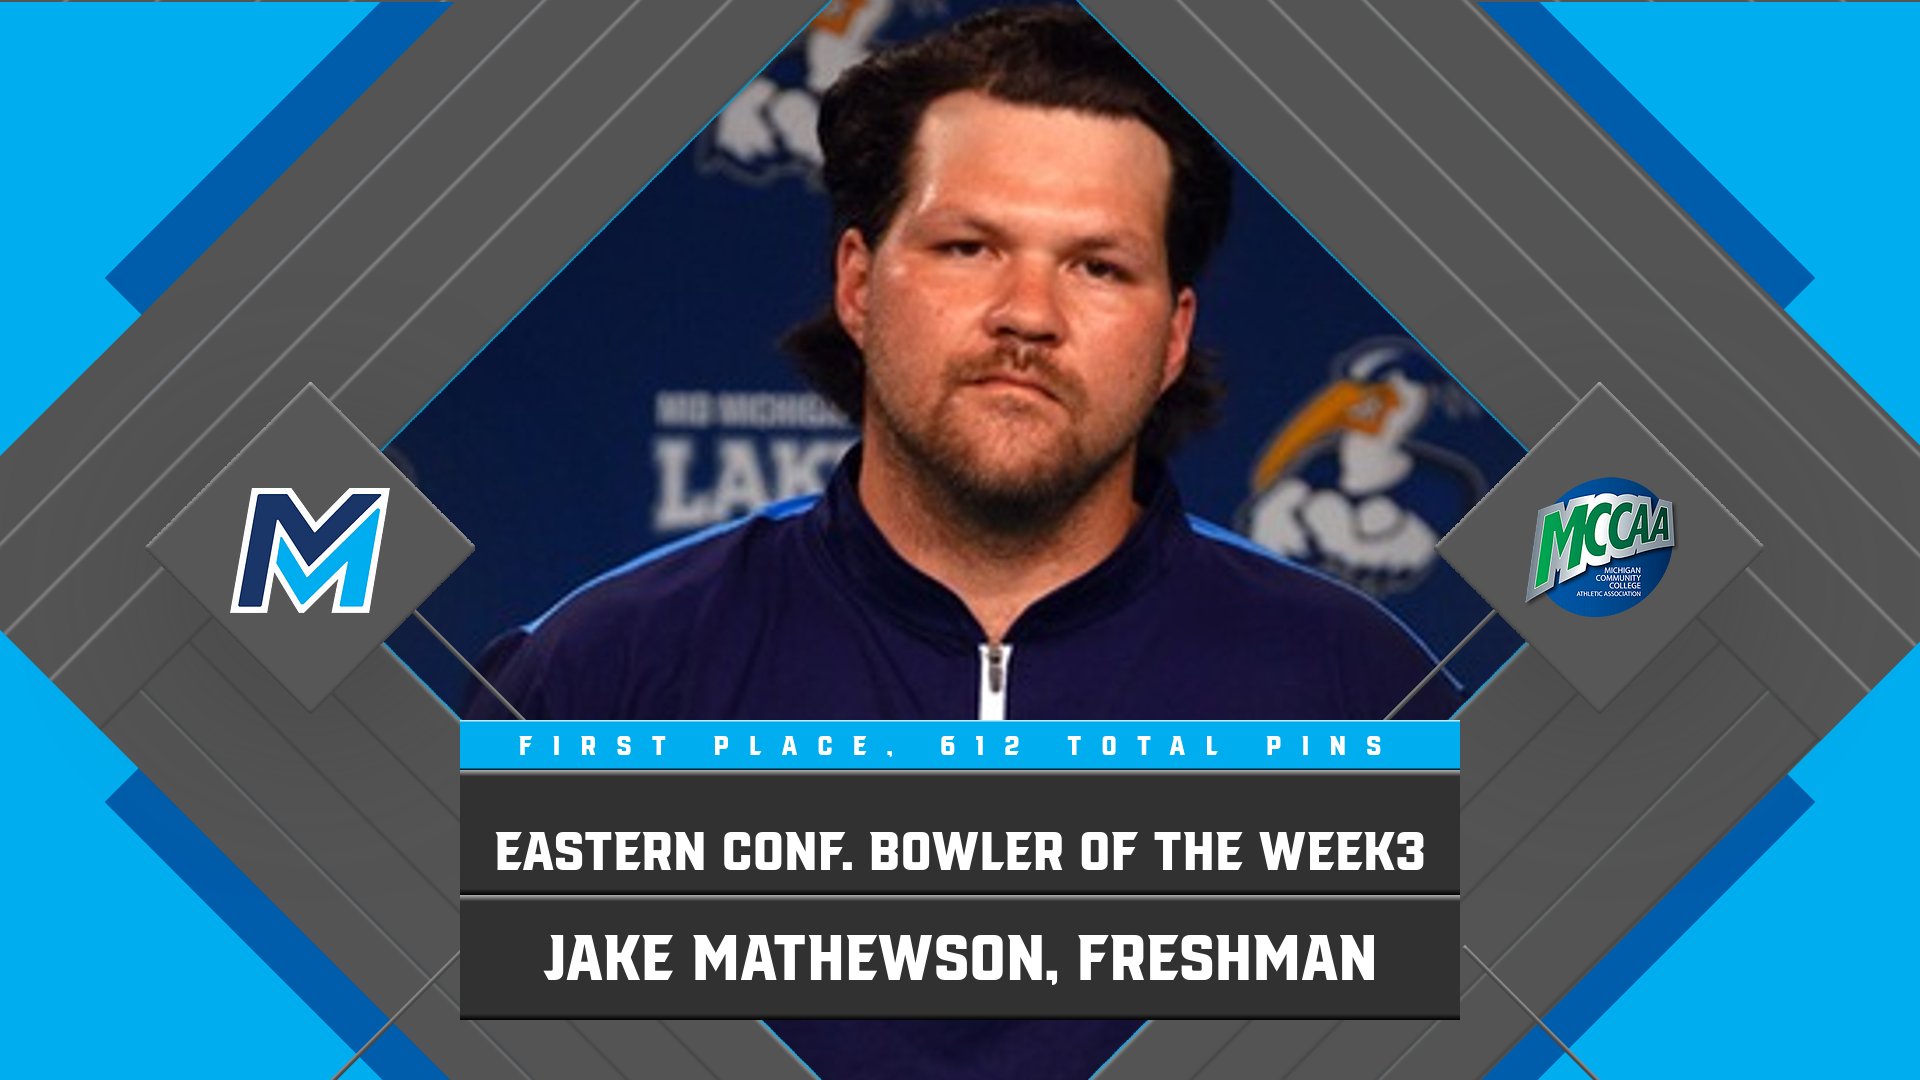 Mid Michigan's Mathewson Named MCCAA Eastern Conference Men's Bowler of the Week3